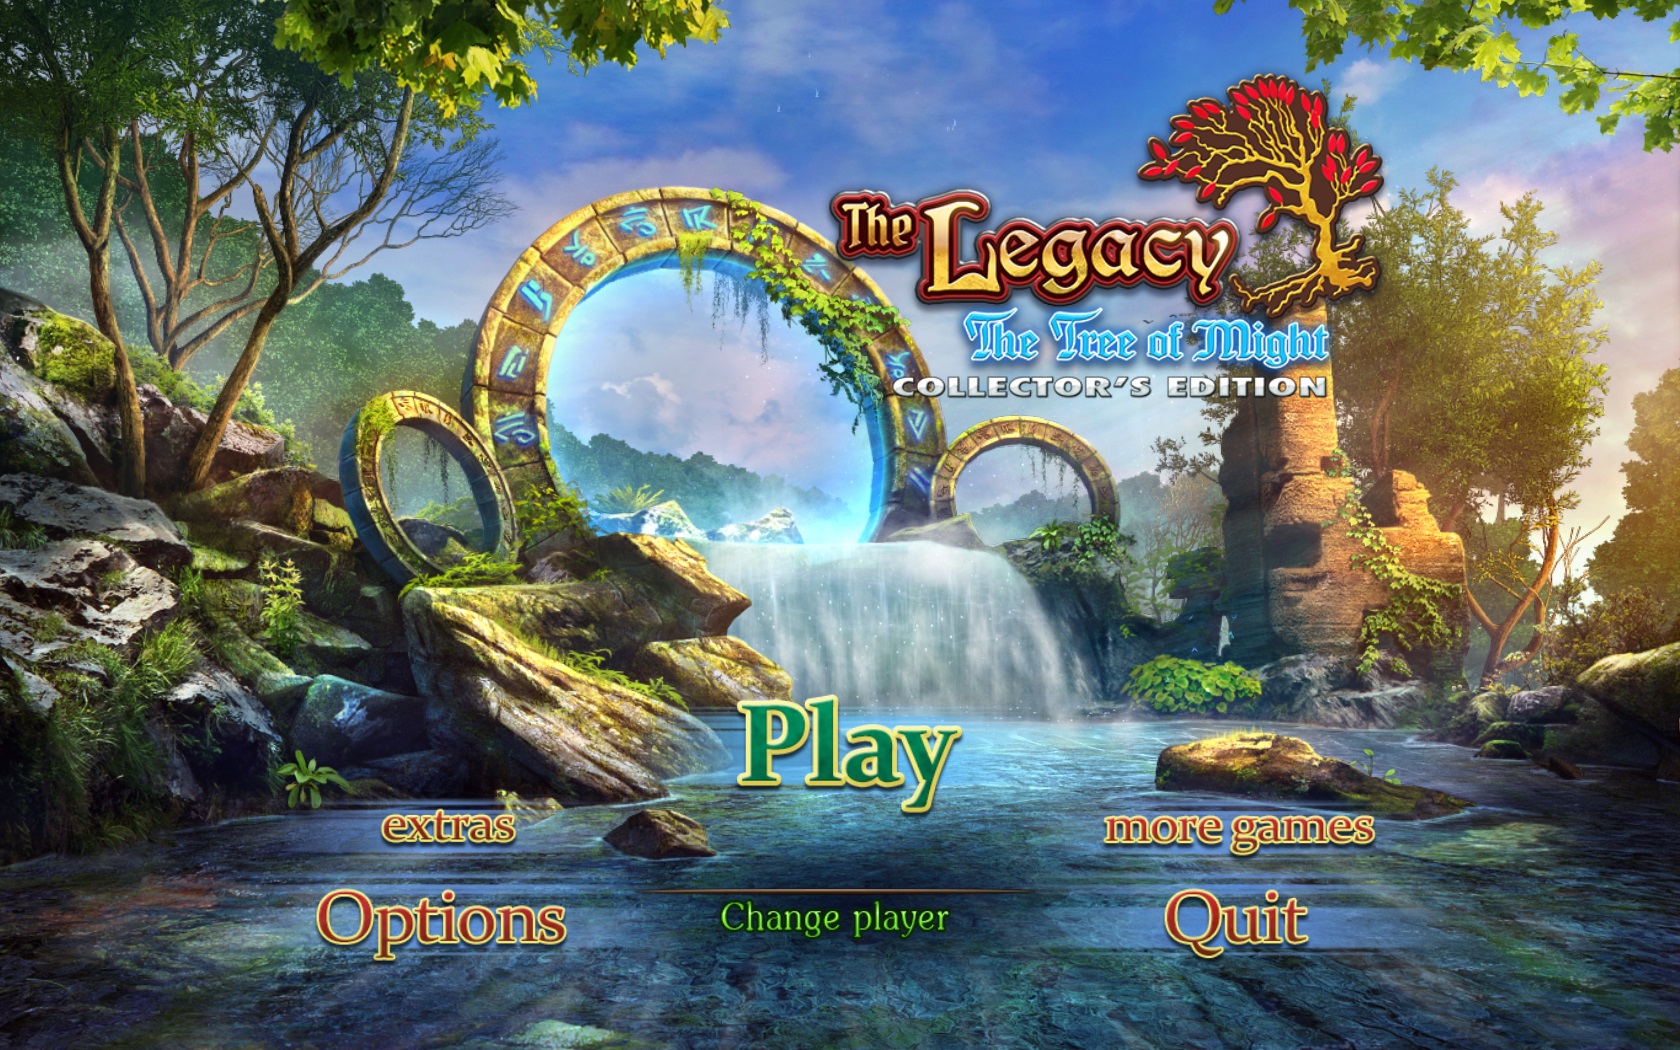 The Legacy: The Tree of Might Free Download